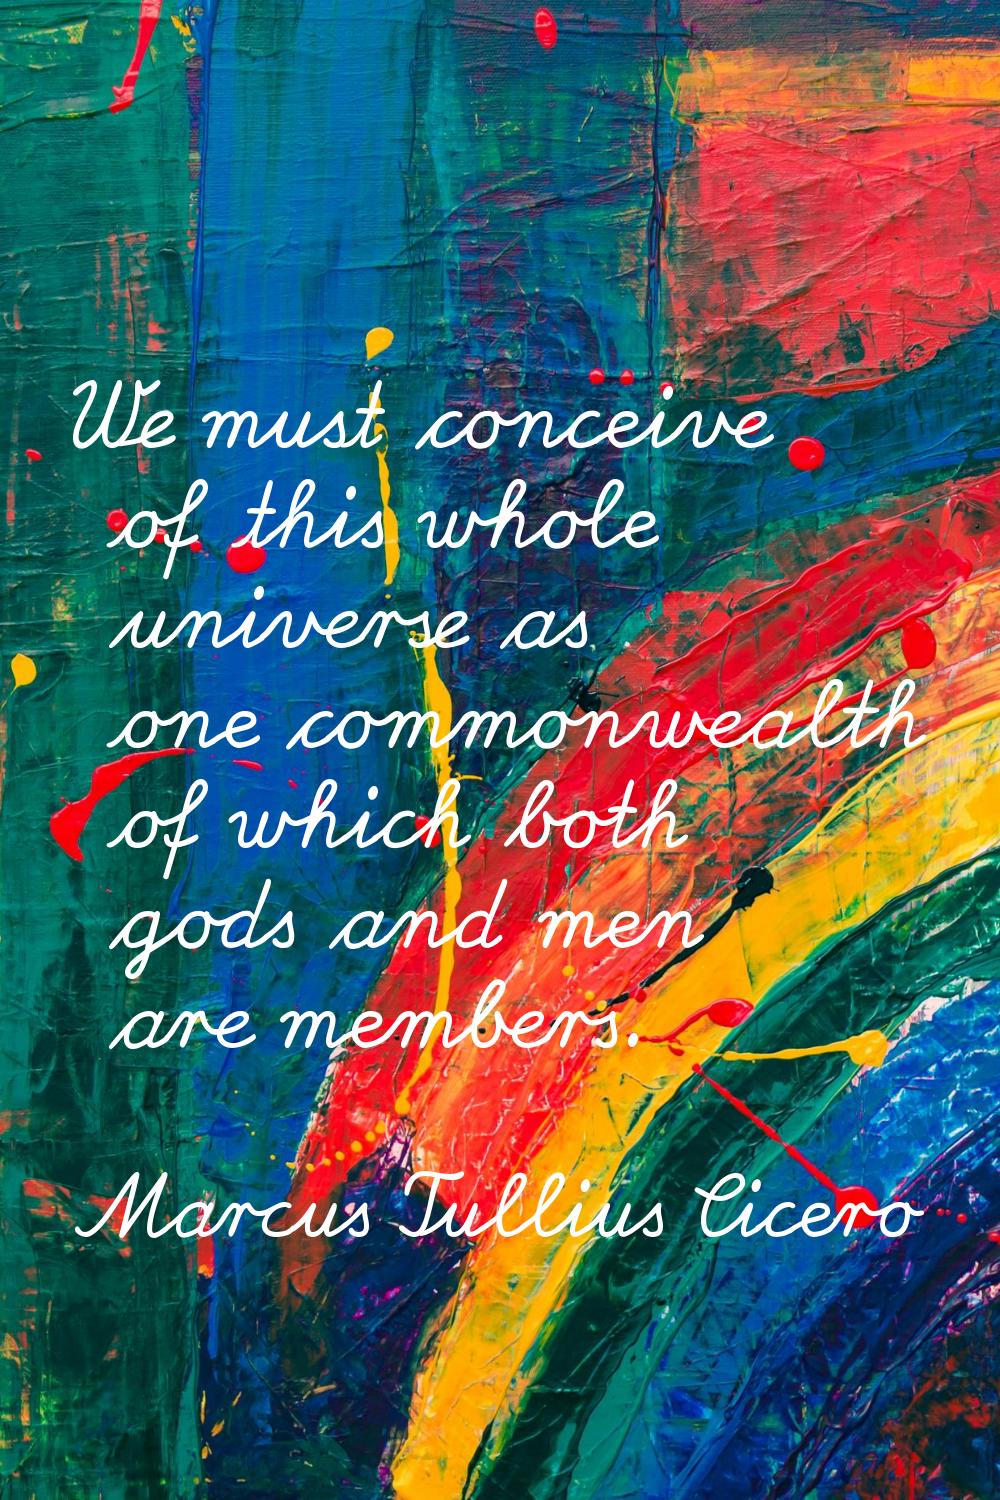 We must conceive of this whole universe as one commonwealth of which both gods and men are members.